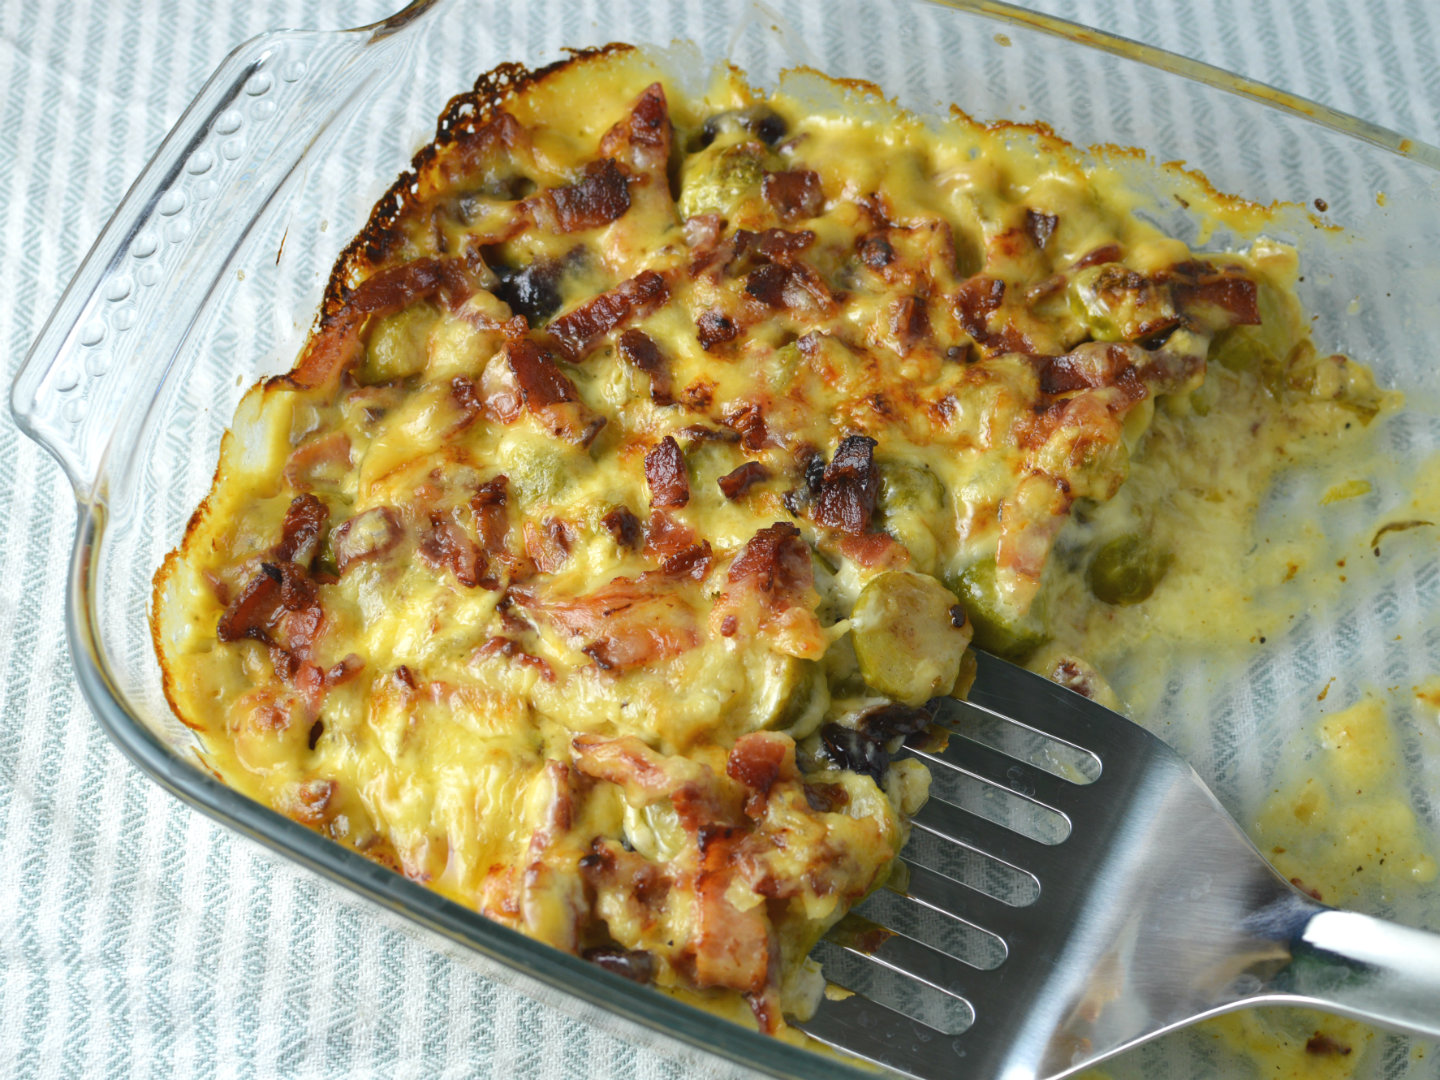 oven baked brussels sprouts gratin with bacon and cranberries